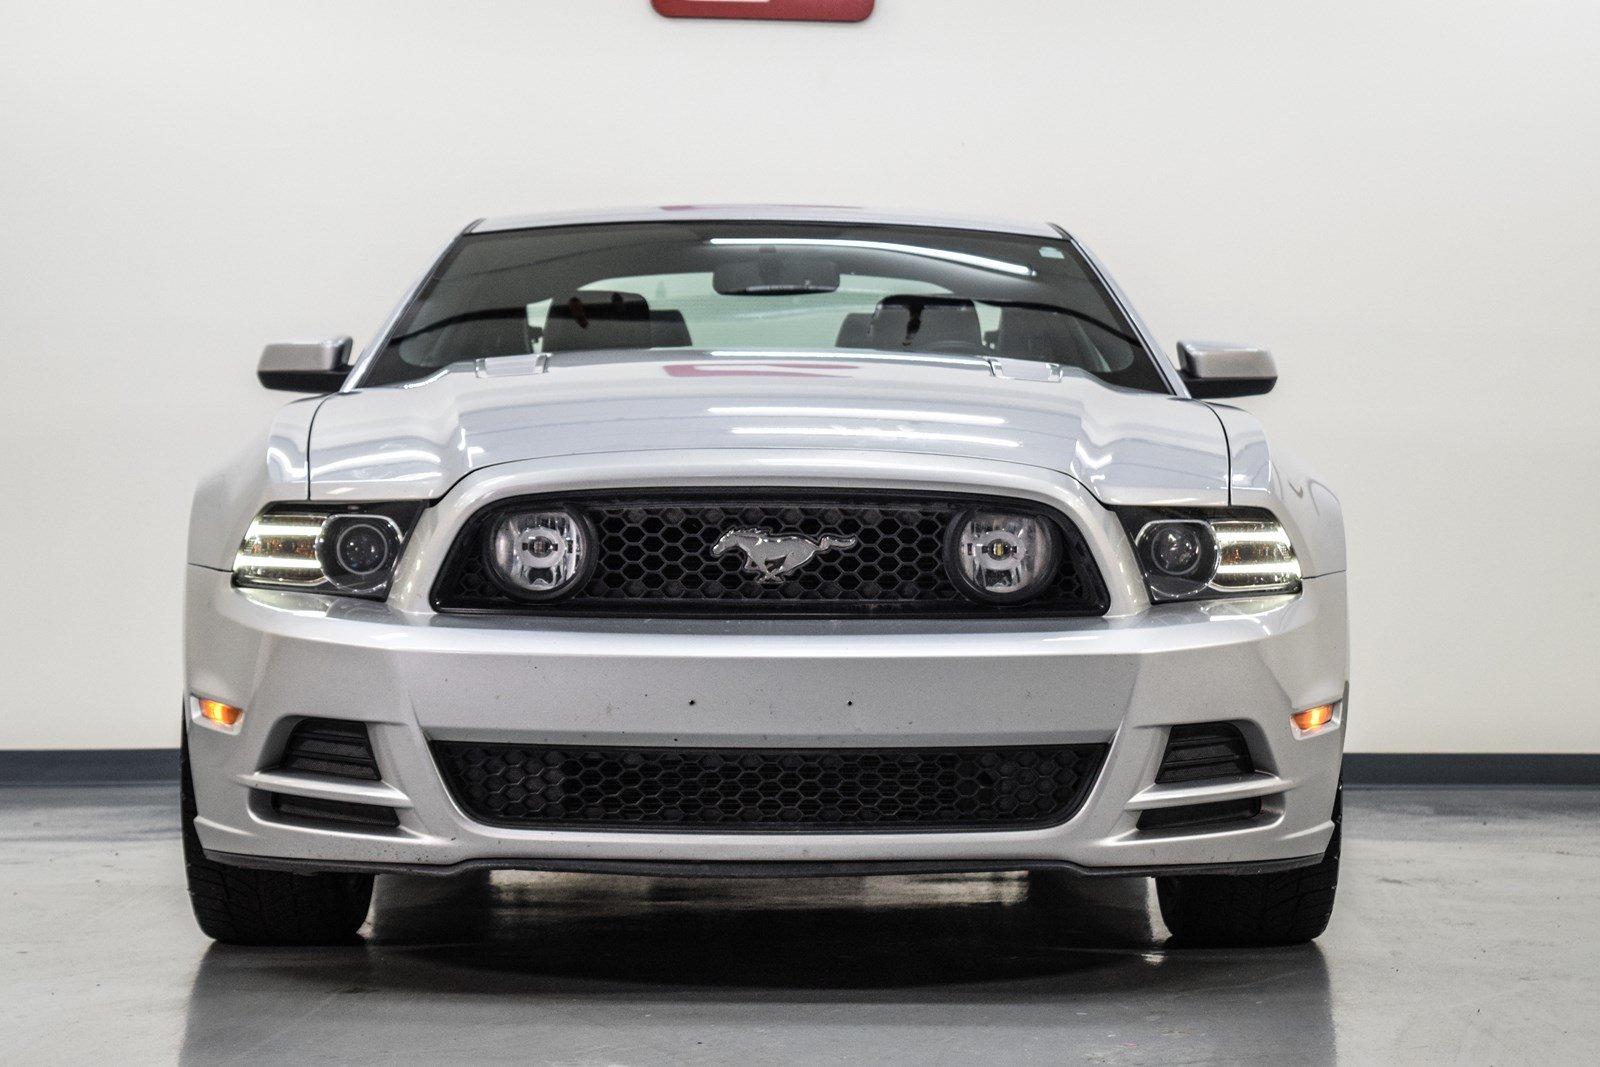 Used 2013 Ford Mustang GT Premium for sale Sold at Gravity Autos Marietta in Marietta GA 30060 6